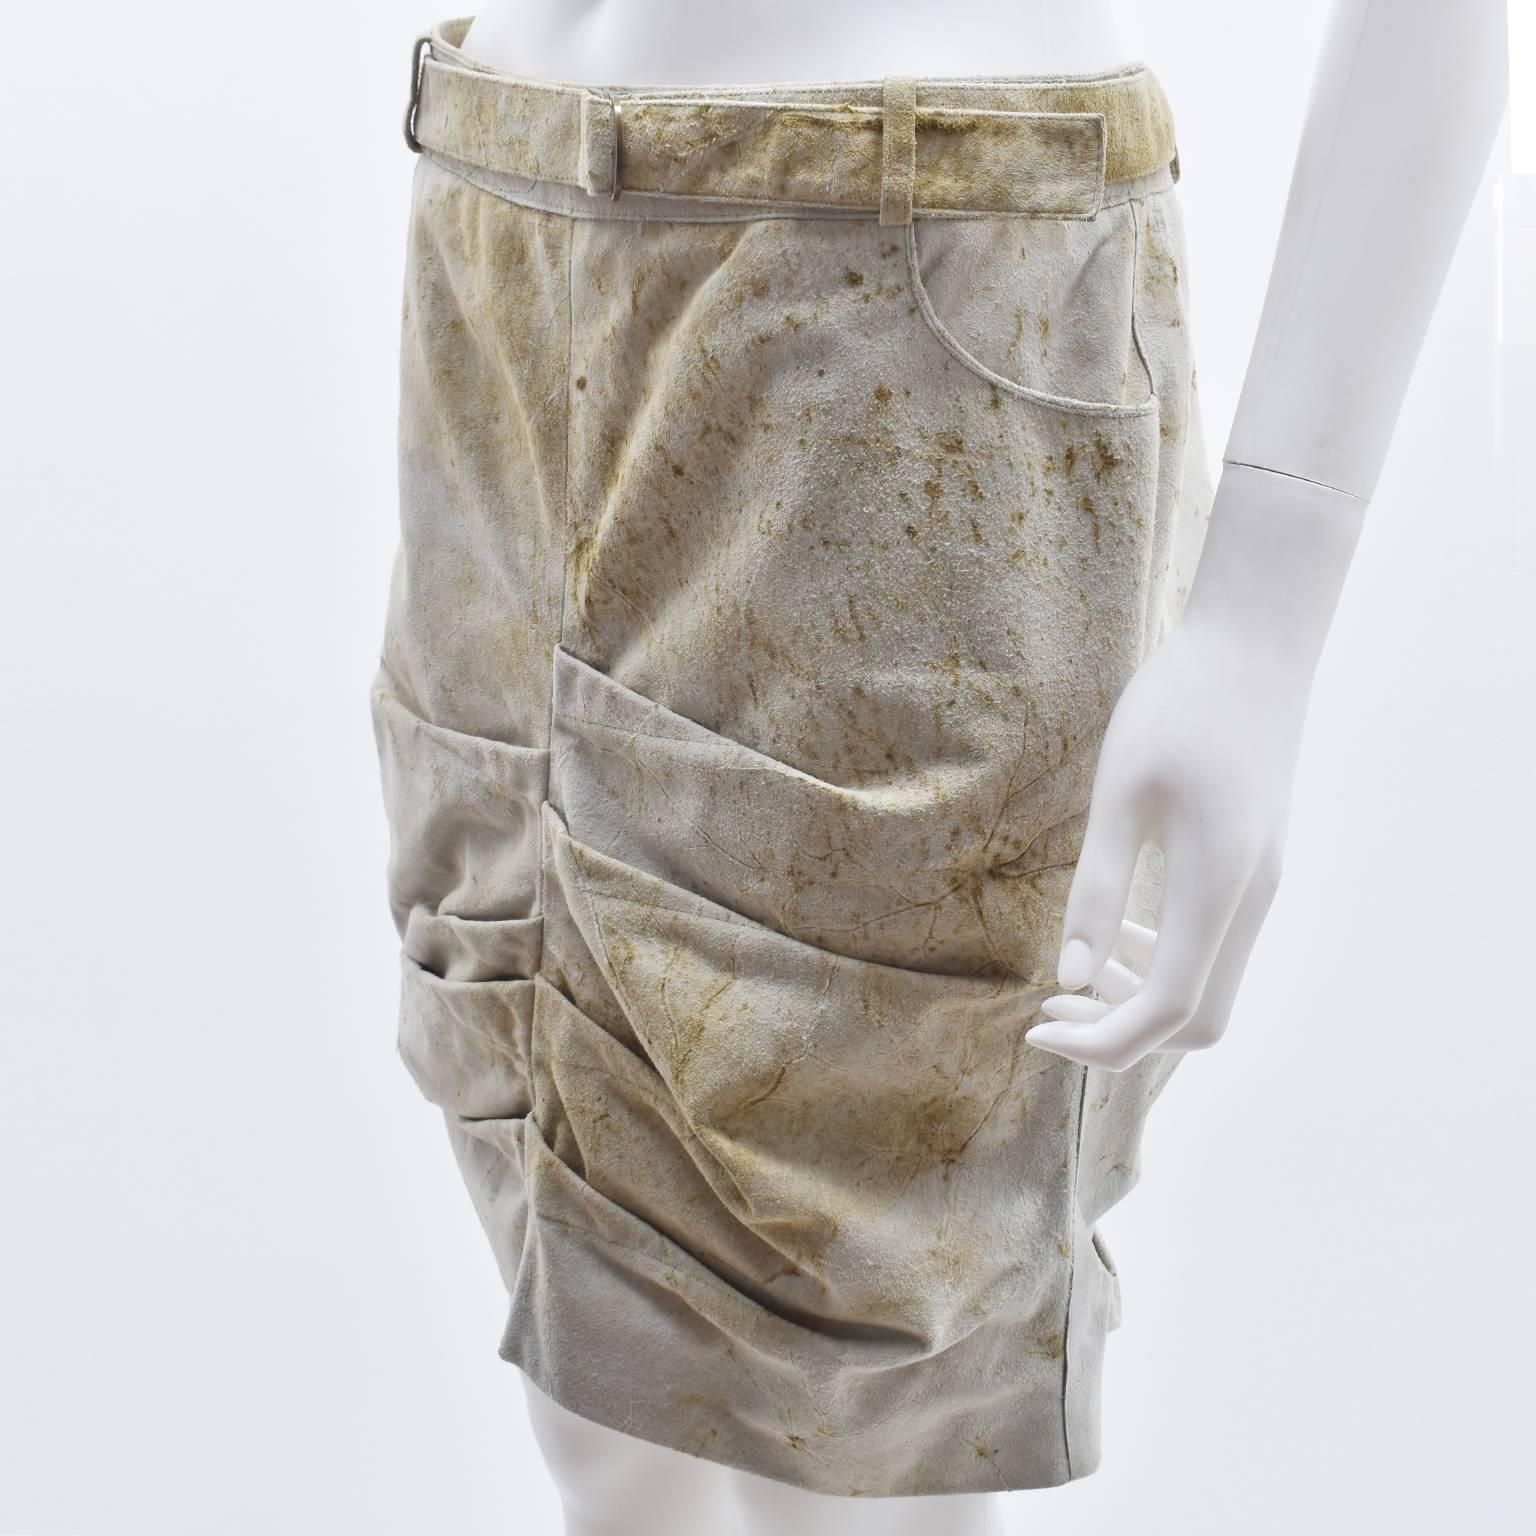 A rare Christian Dior leather mini skirt from the 00’s designed by John Galliano. The skirt is made from calfskin which has a suede-like texture and has been treated to have a distressed and worn aesthetic. The seat of the skirt also features a